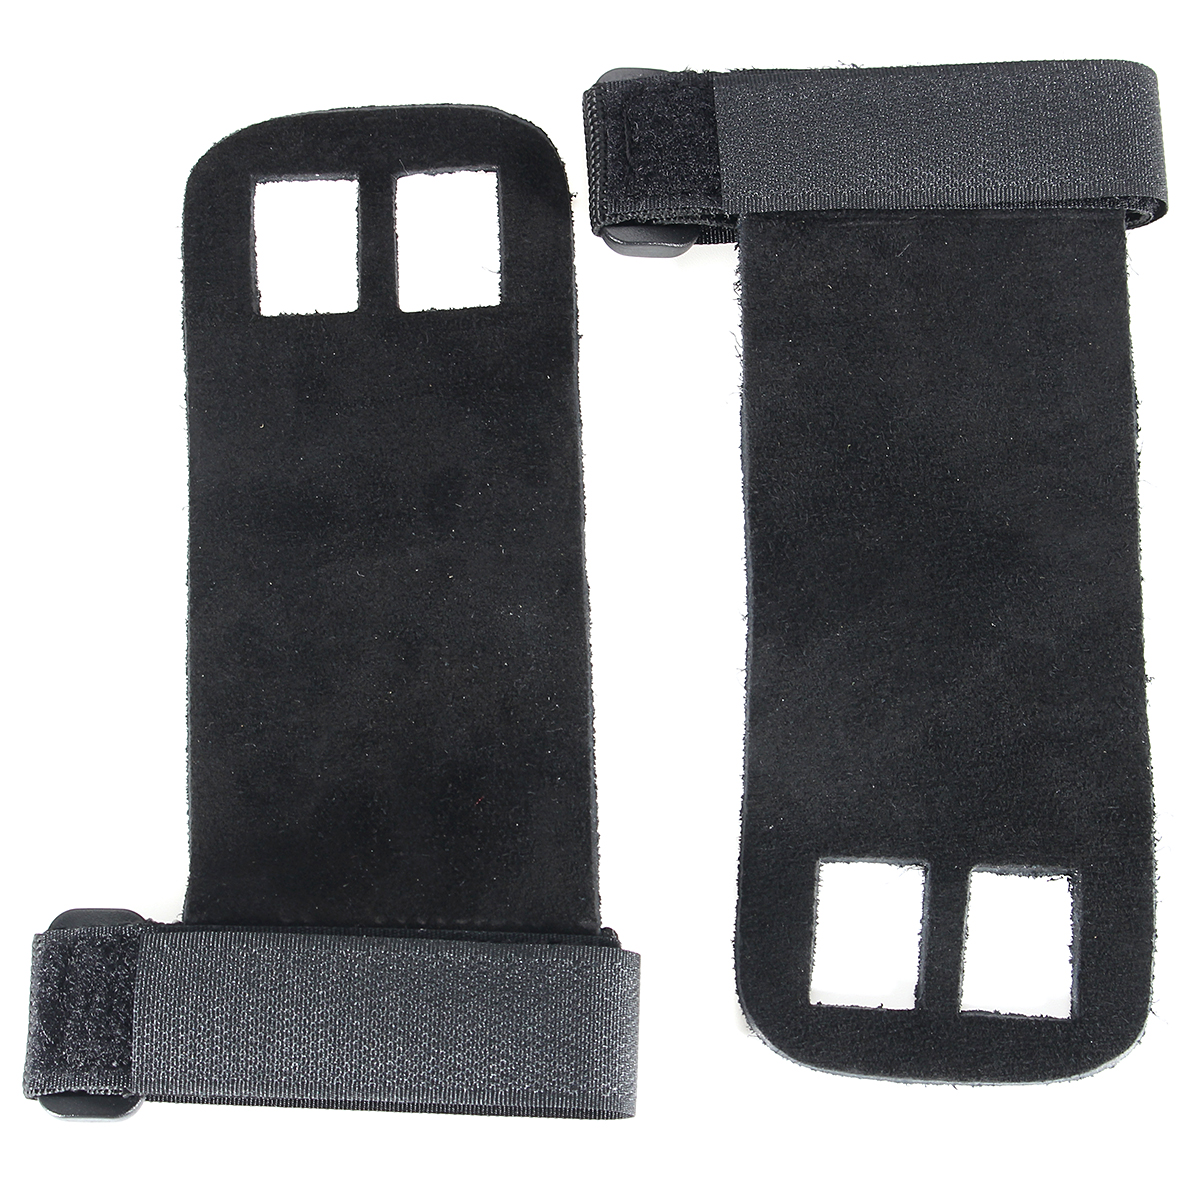 1Pair-Crossfit-Grips-for-Weight-lifting-Hand-Support-Gymnastics-Leather-Palm-Protectors-Hand-Guards-1226402-4